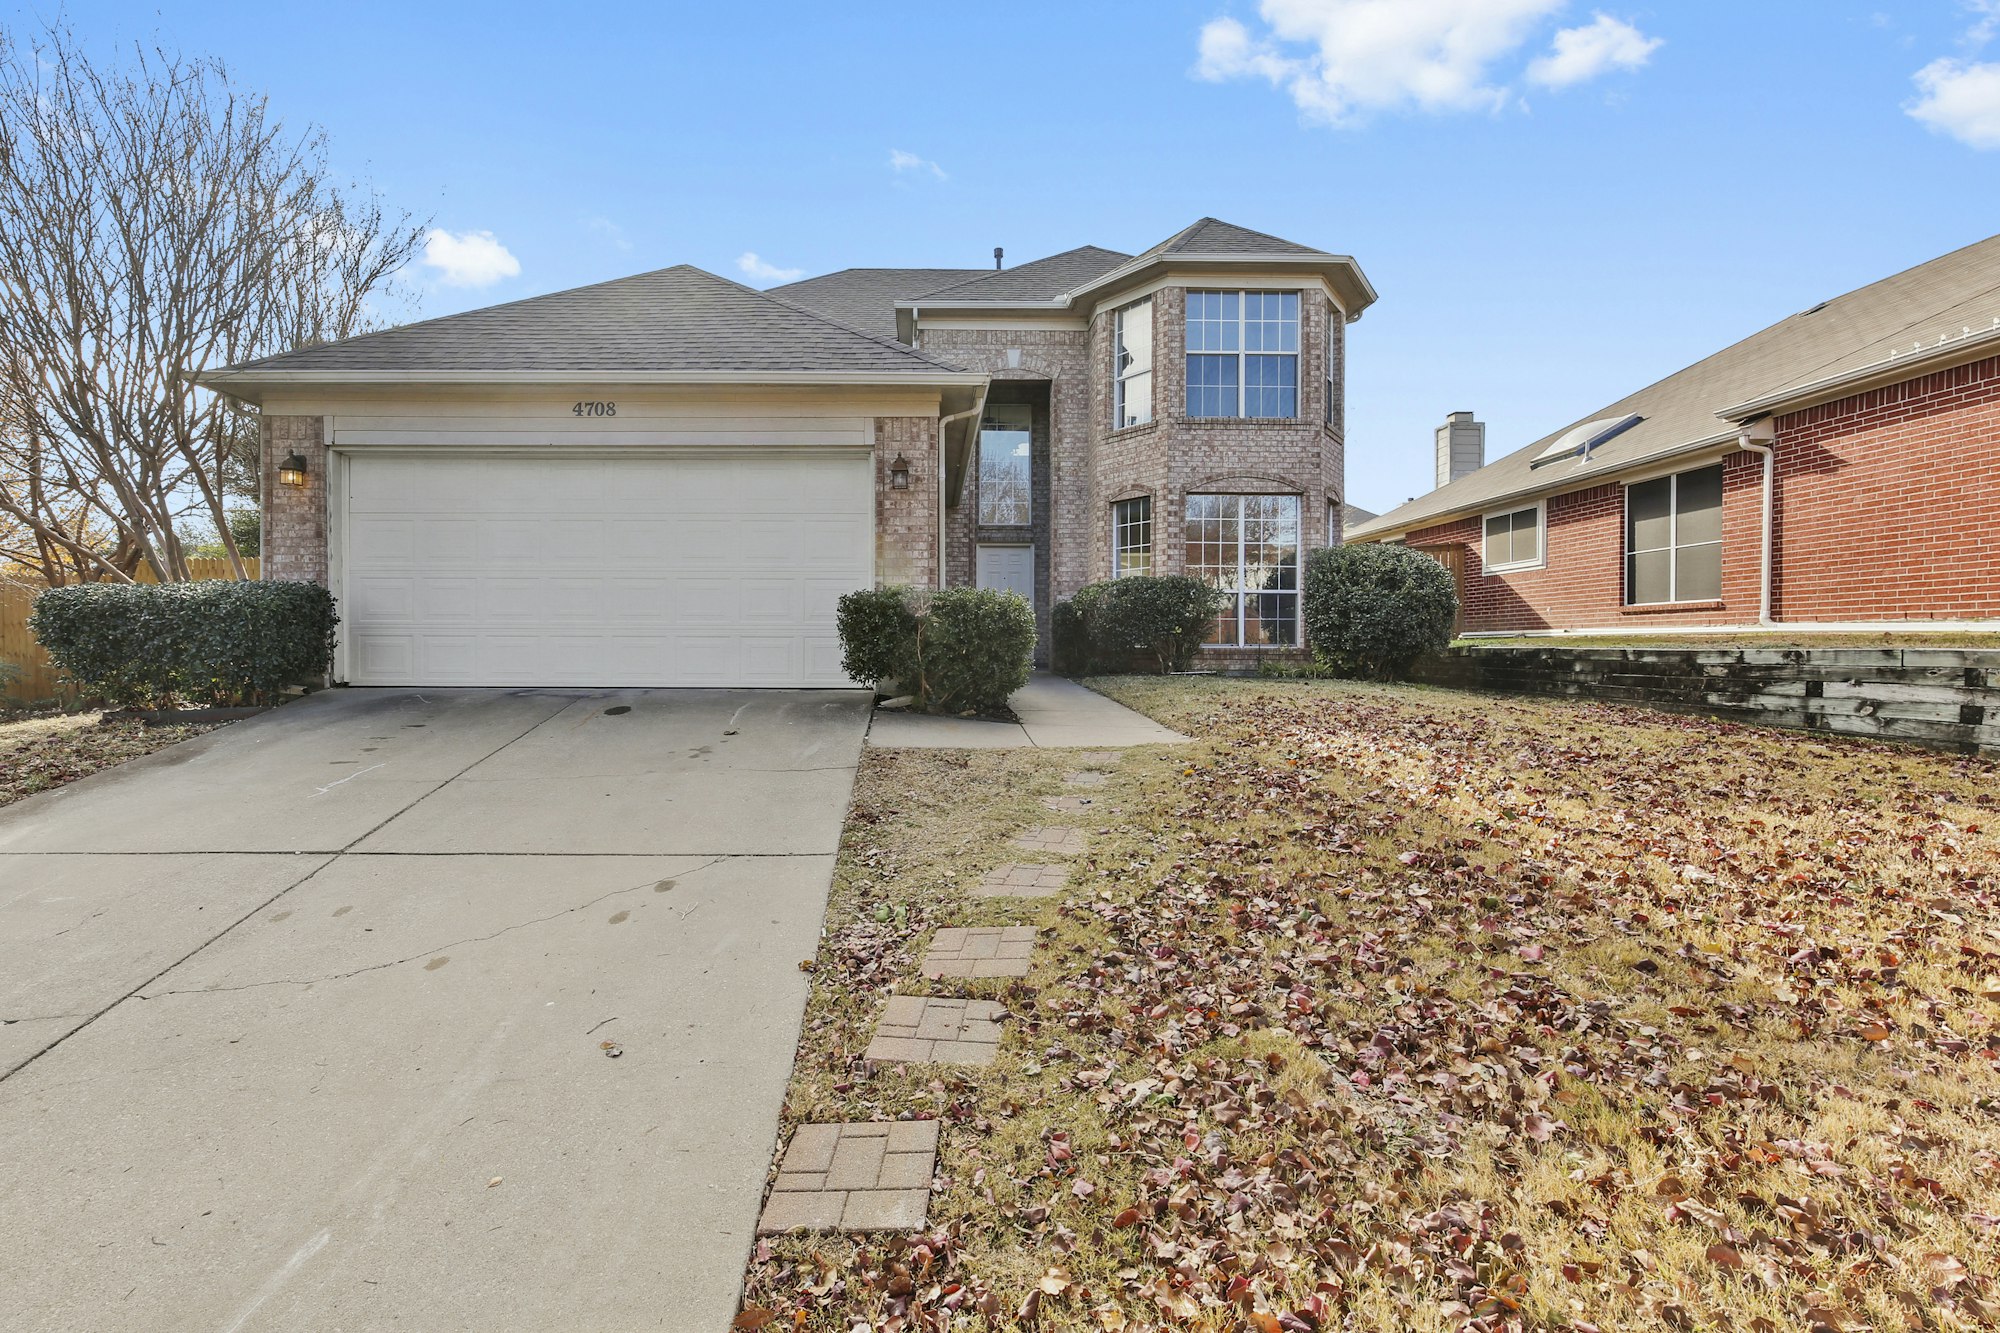 Photo 1 of 31 - 4708 Park Bend Dr, Fort Worth, TX 76137